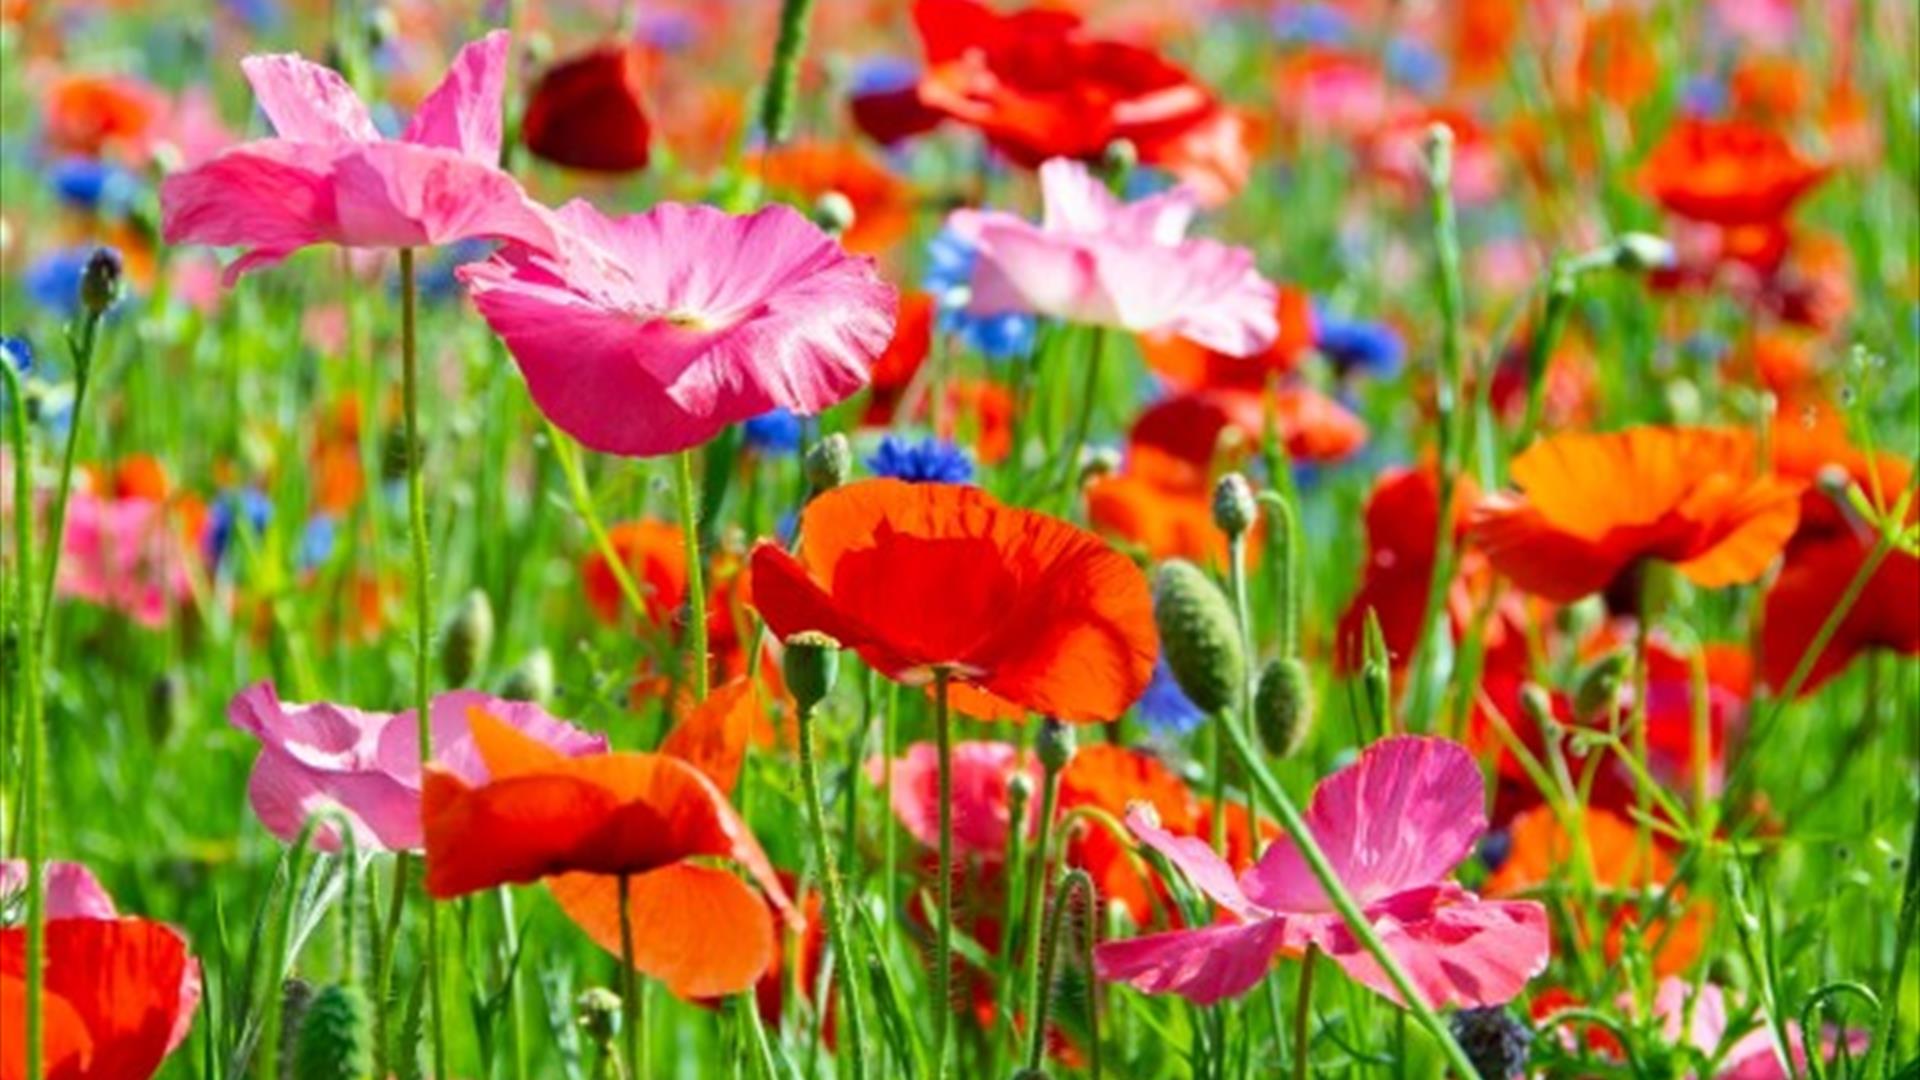 Image is of colourful wildflowers in a field